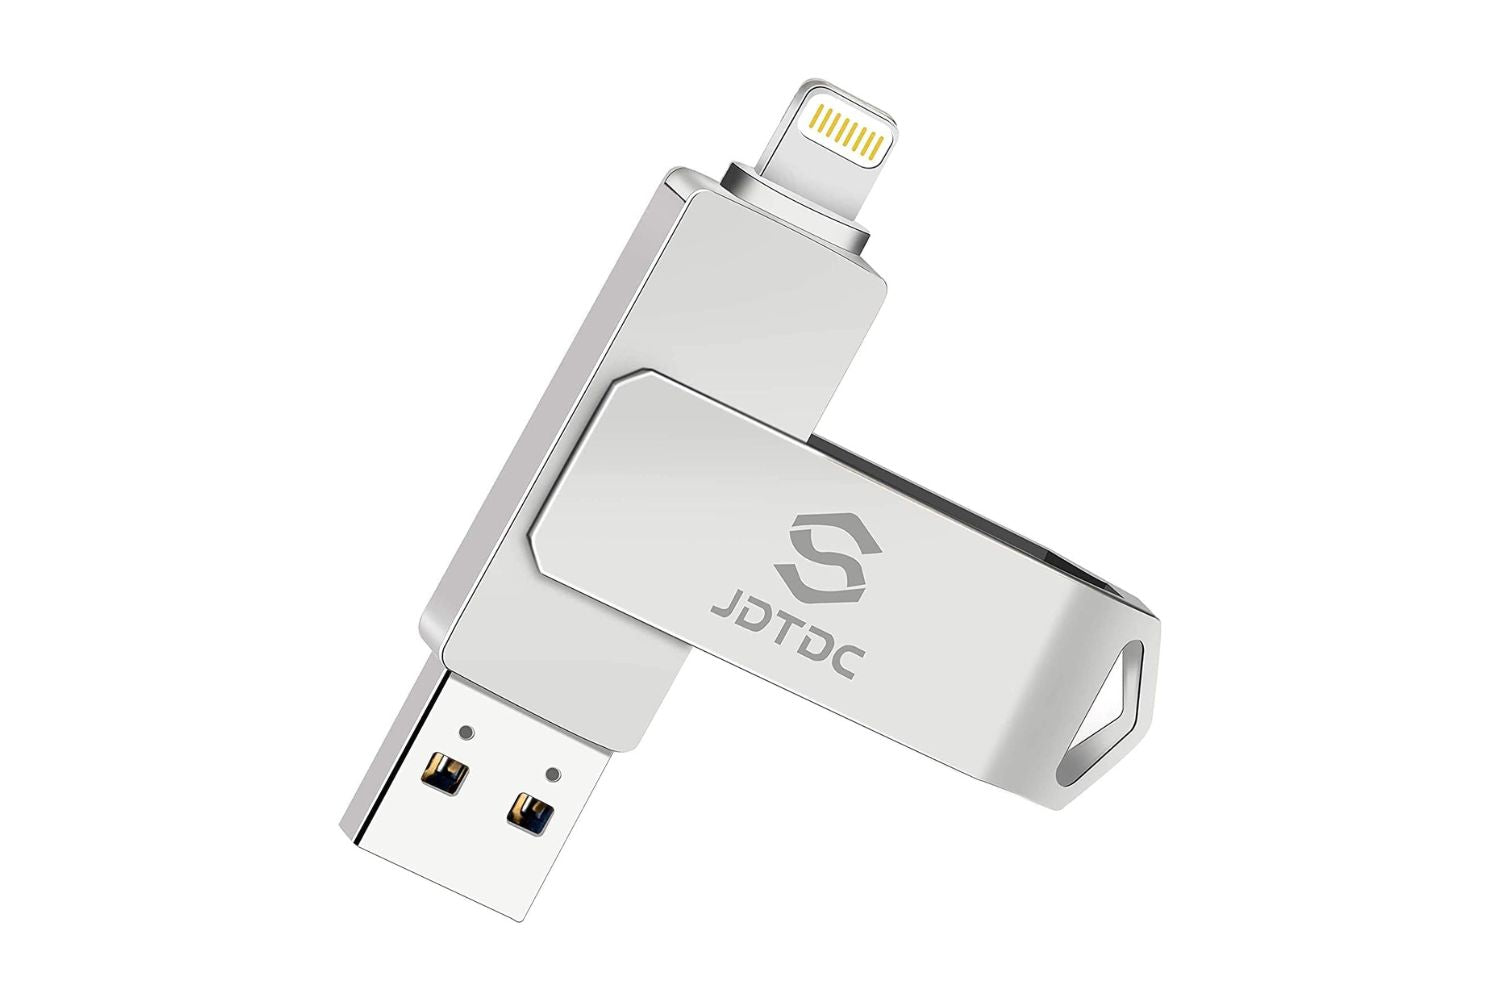 Apple MFi Certified Flash Drive for iPhone - 3 in 1 High Speed 512GB USB  Memory Stick Thumb Drive, External Storage Photo Stick for iPhone/iPad/PC  (Gold) - Coupon Codes, Promo Codes, Daily